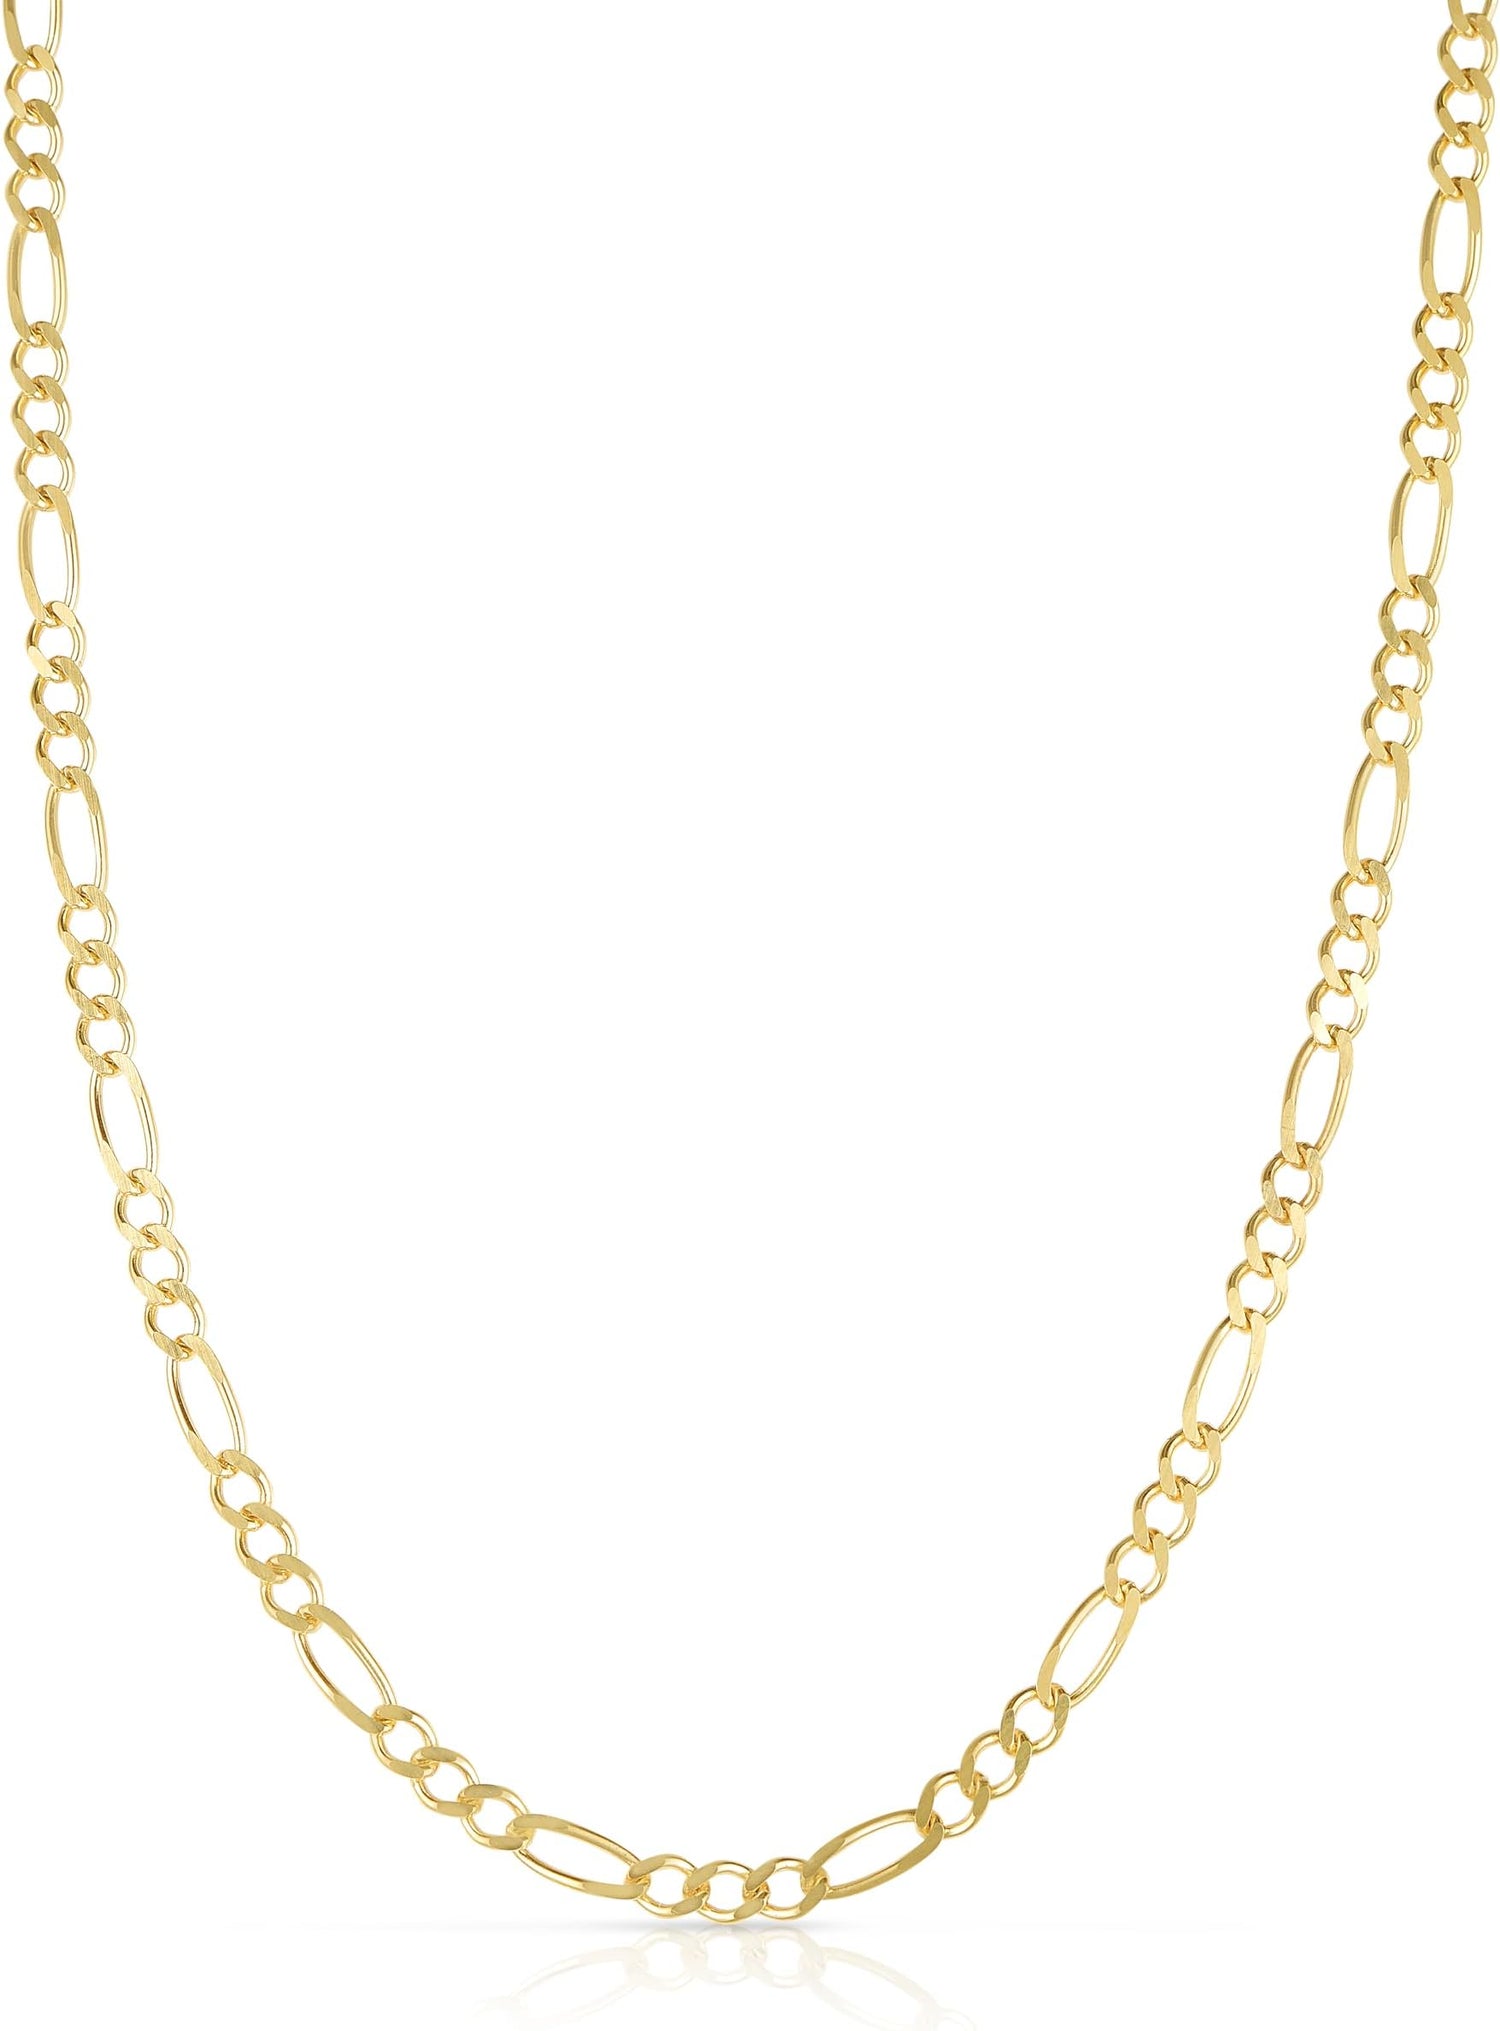 14k Yellow Gold or White Gold 2mm Solid Figaro Chain Necklace